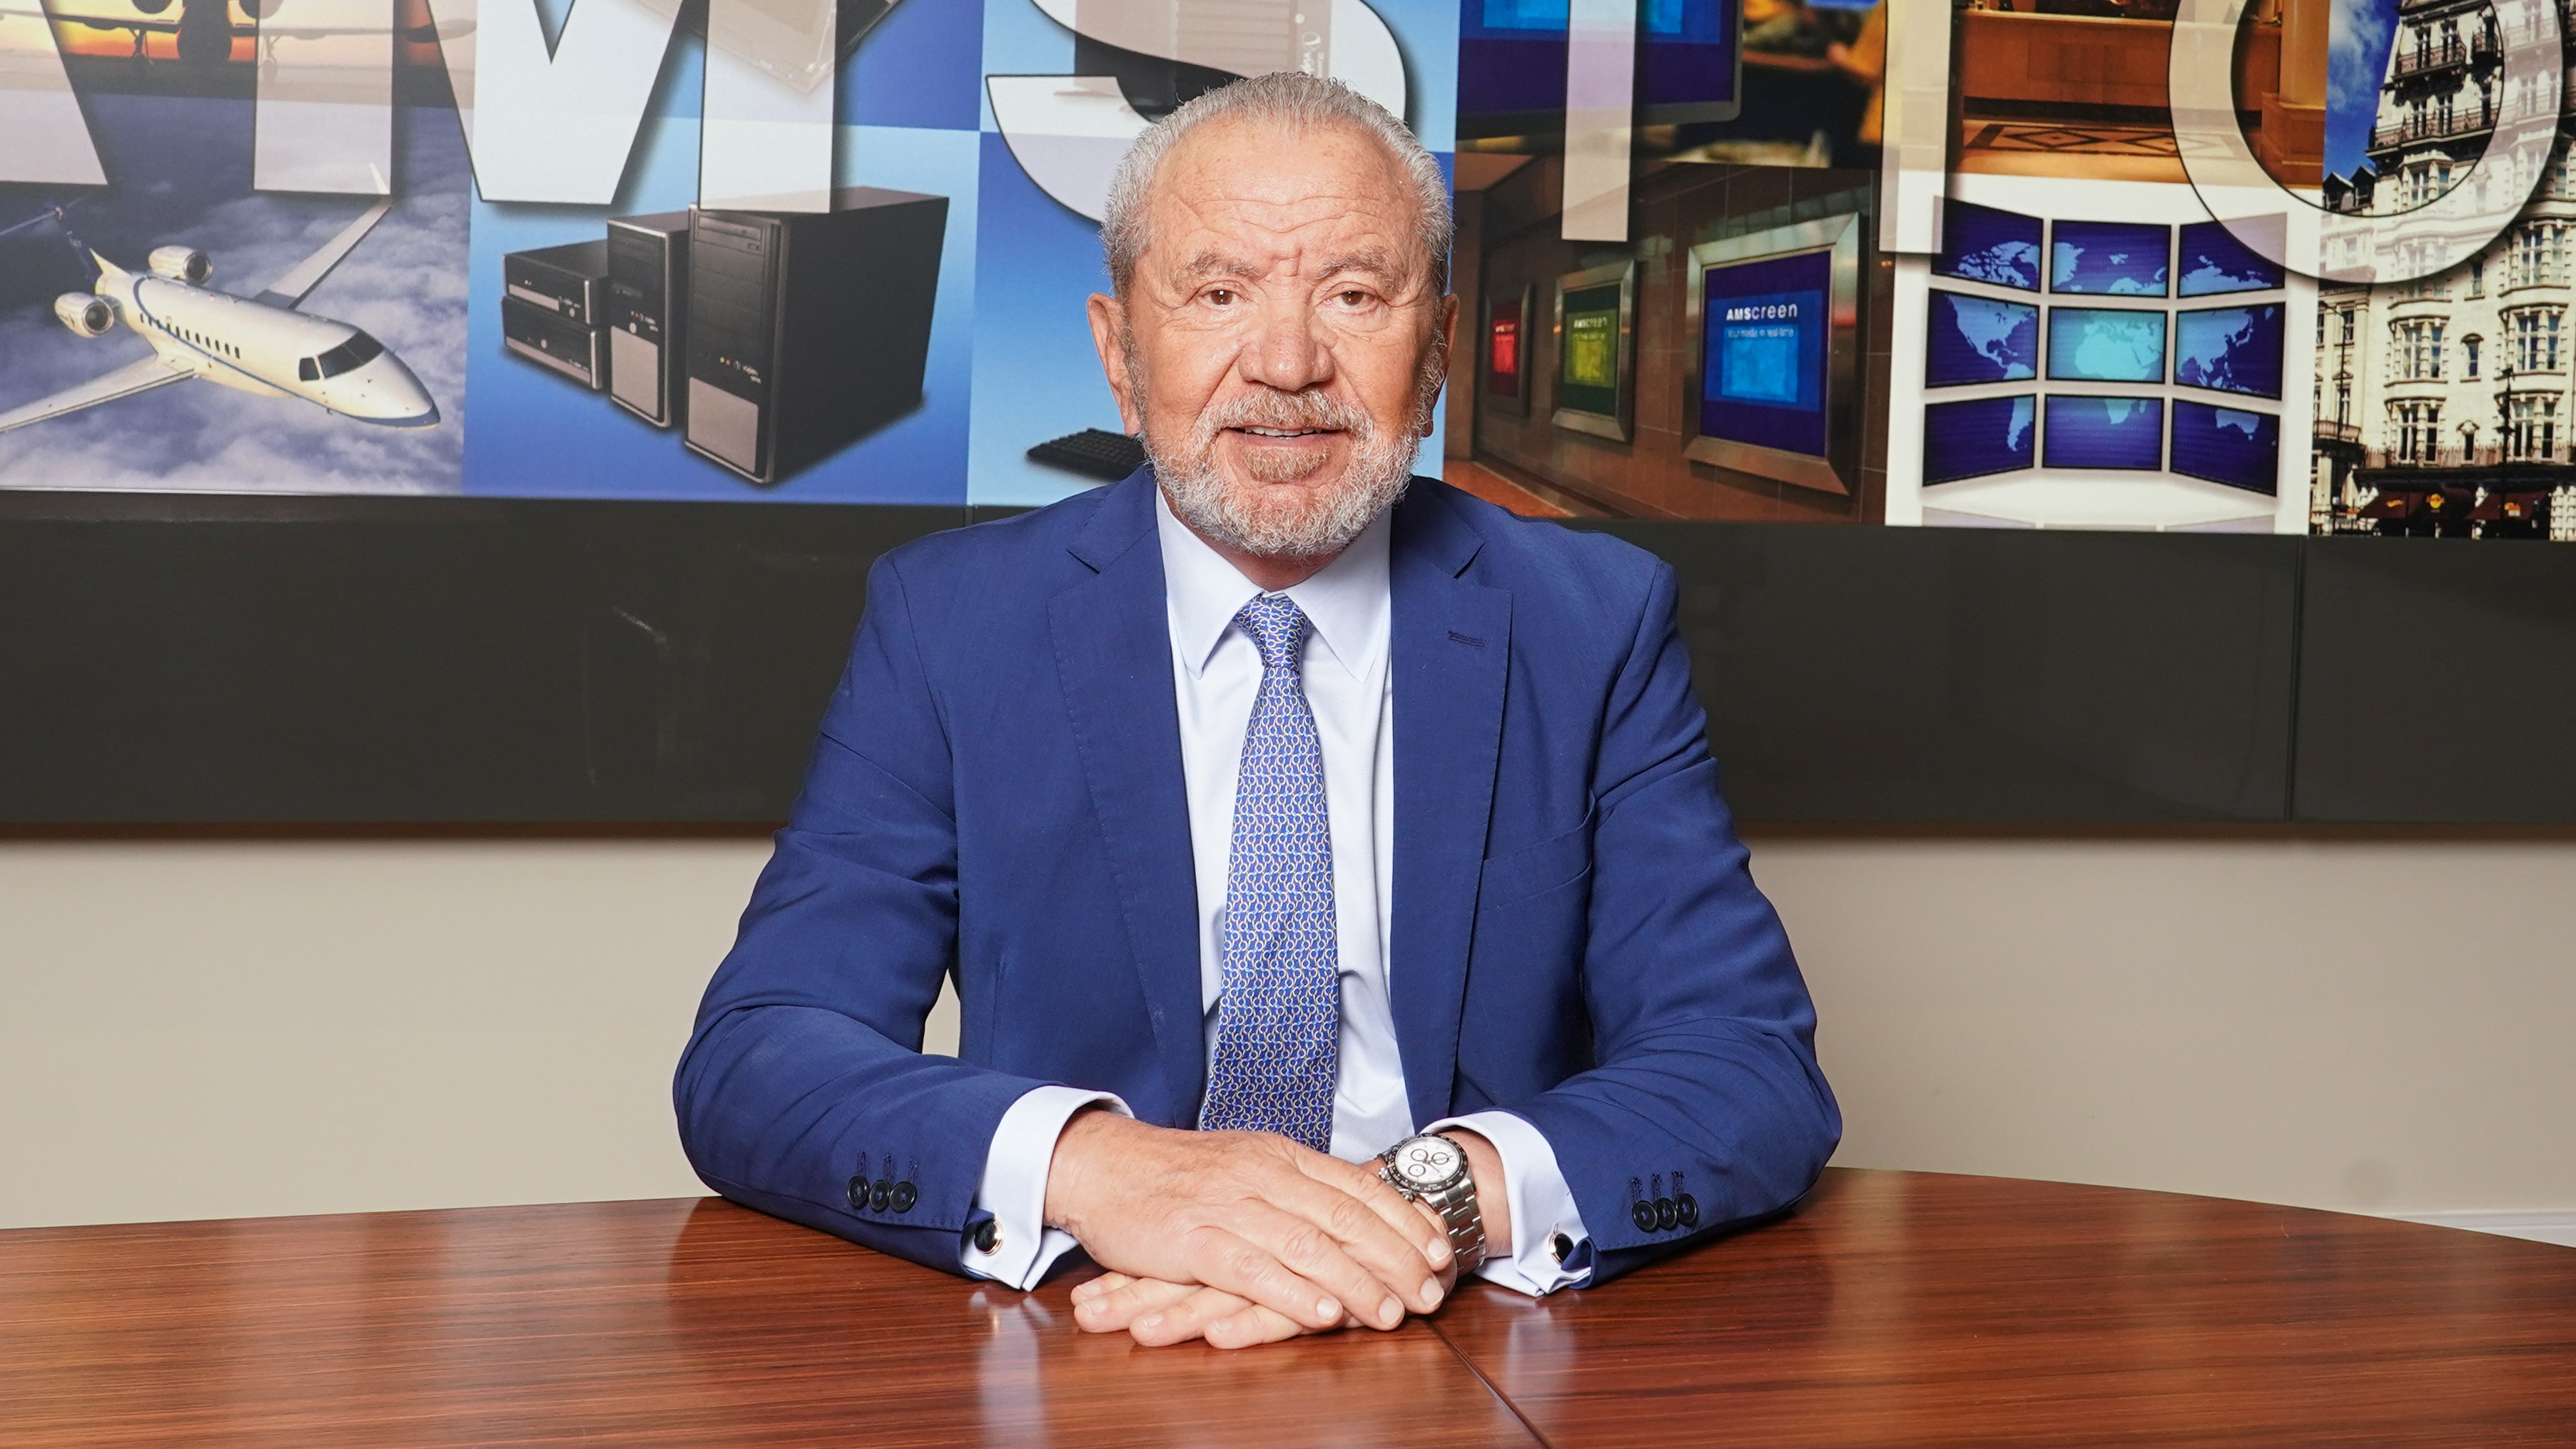 Lord Sugar’s net wealth has decreased since last year owing to large tax charges